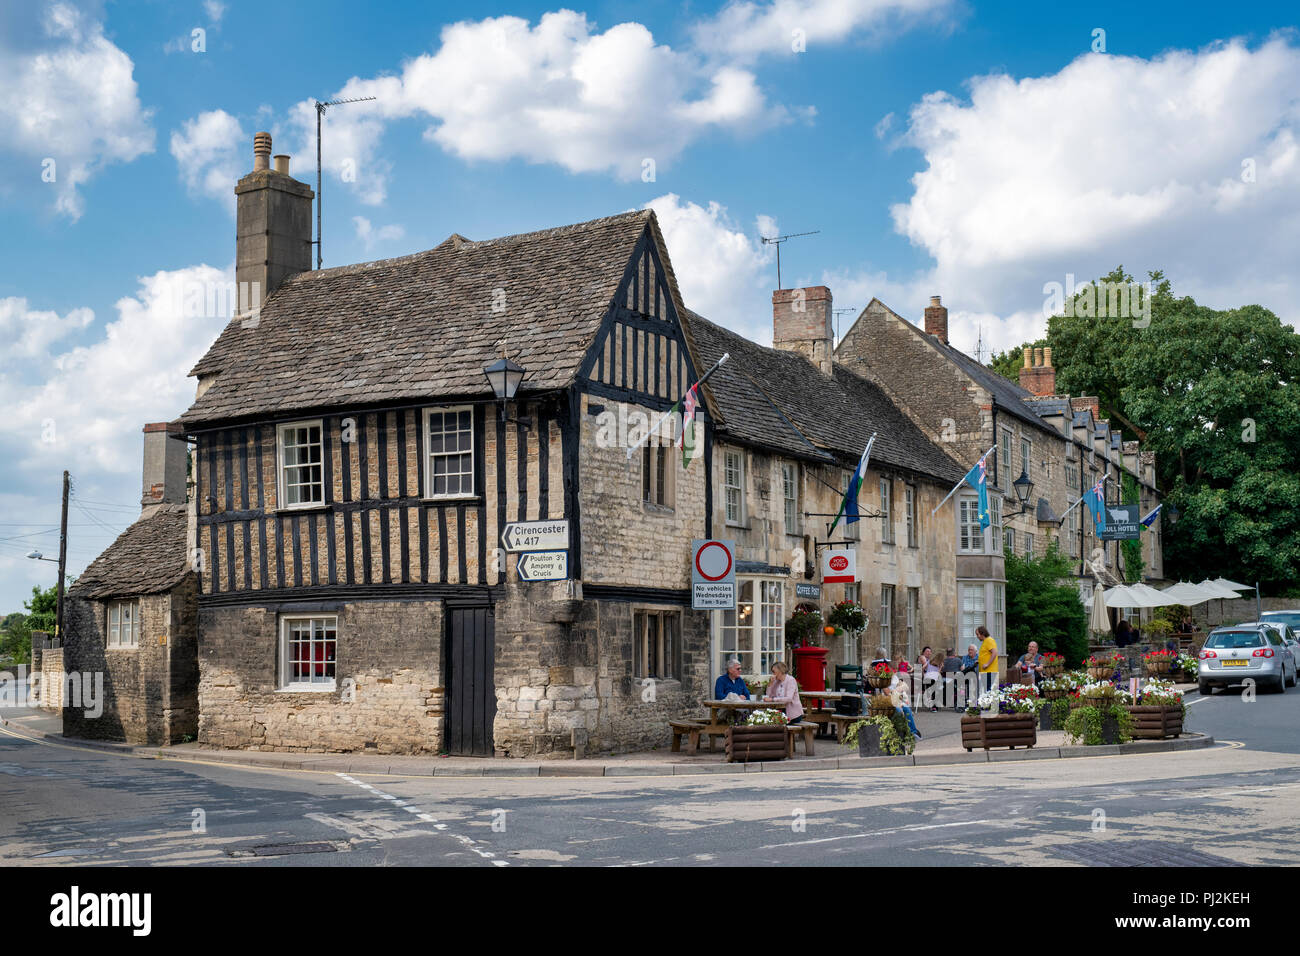 The Chanting House and Post office in Fairford, Cotswolds, Gloucestershire, England Stock Photo